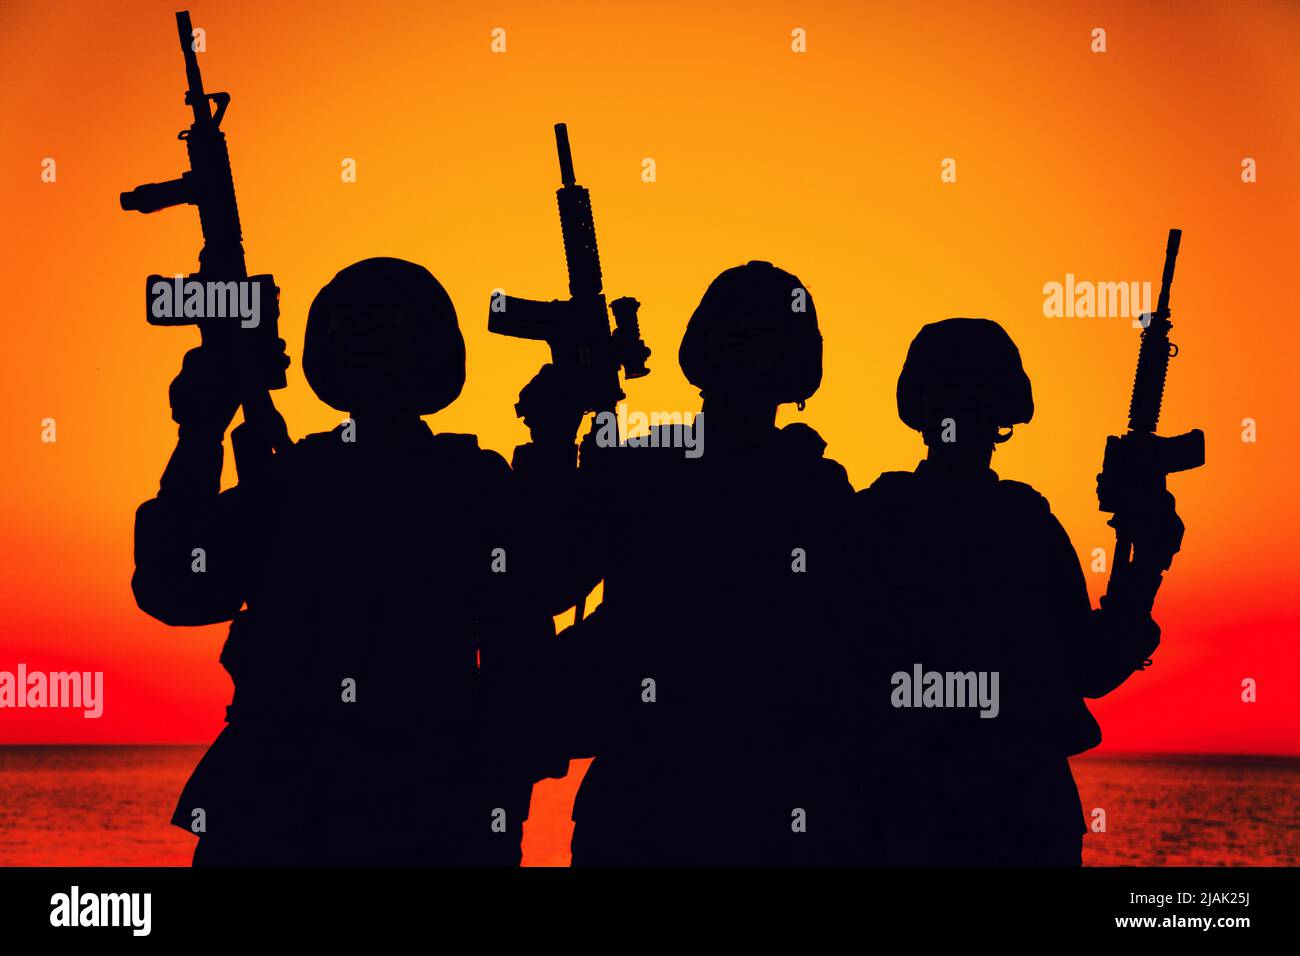 Silhouette of a group of soliders standing on shoreline at sunset, with assault rifles raised. Stock Photo